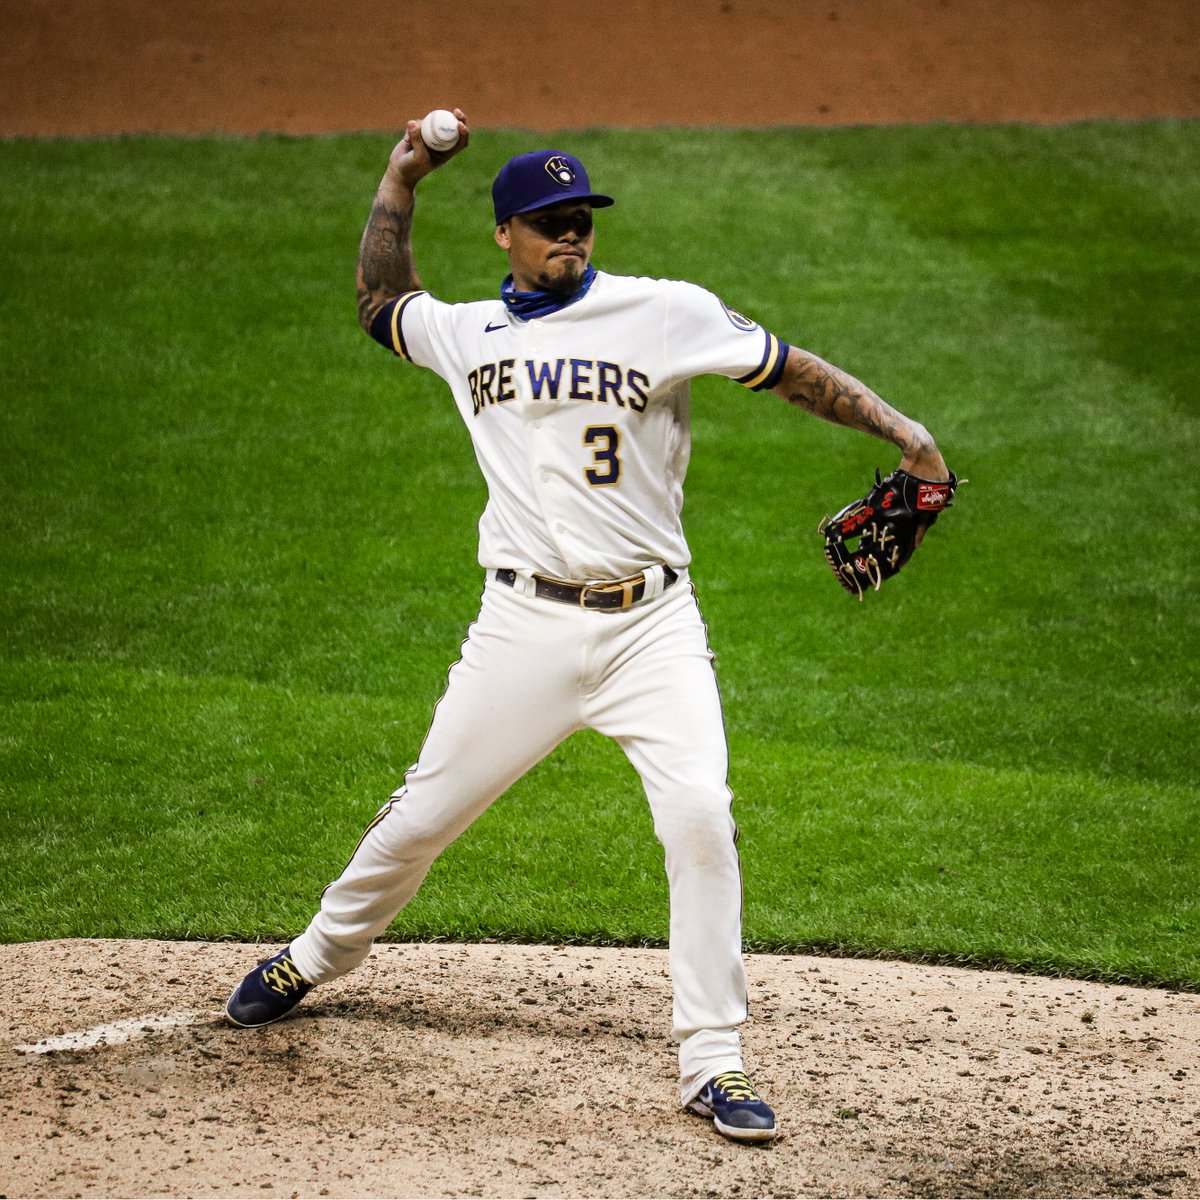 Here is an extremely great photo of our...(•_•) <)  )╯POSITION/  \\  \\(•_•) (  (> PLAYER/  \\(•_•) <)  )> PITCHING/  \\in Milwaukee!